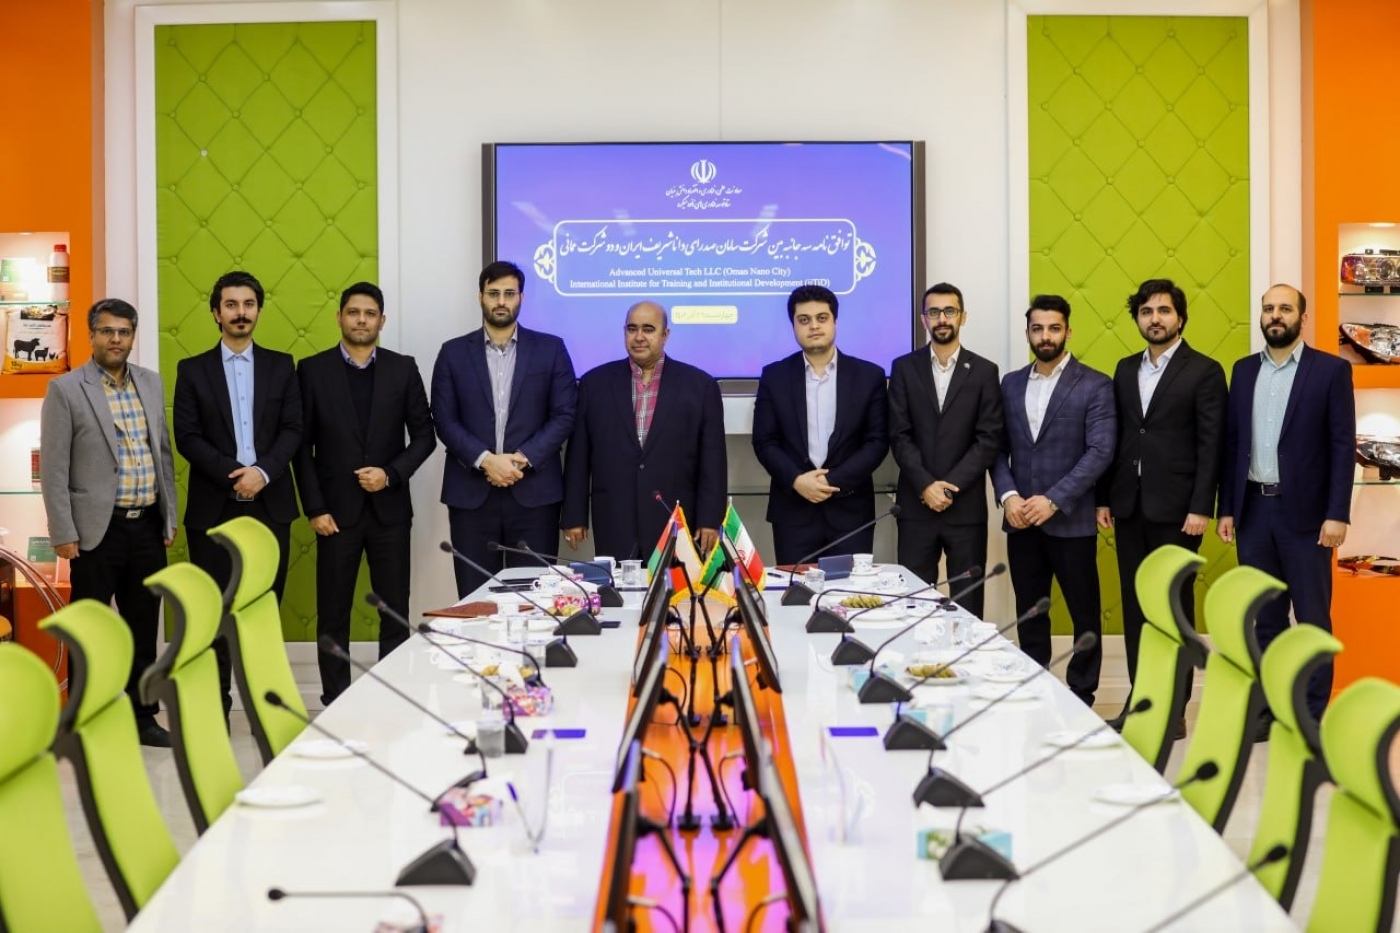 Tripartite Memorandum of Agreement (MOA) for Export of Nanotechnology Services and Products in the Middle East and GCC Region